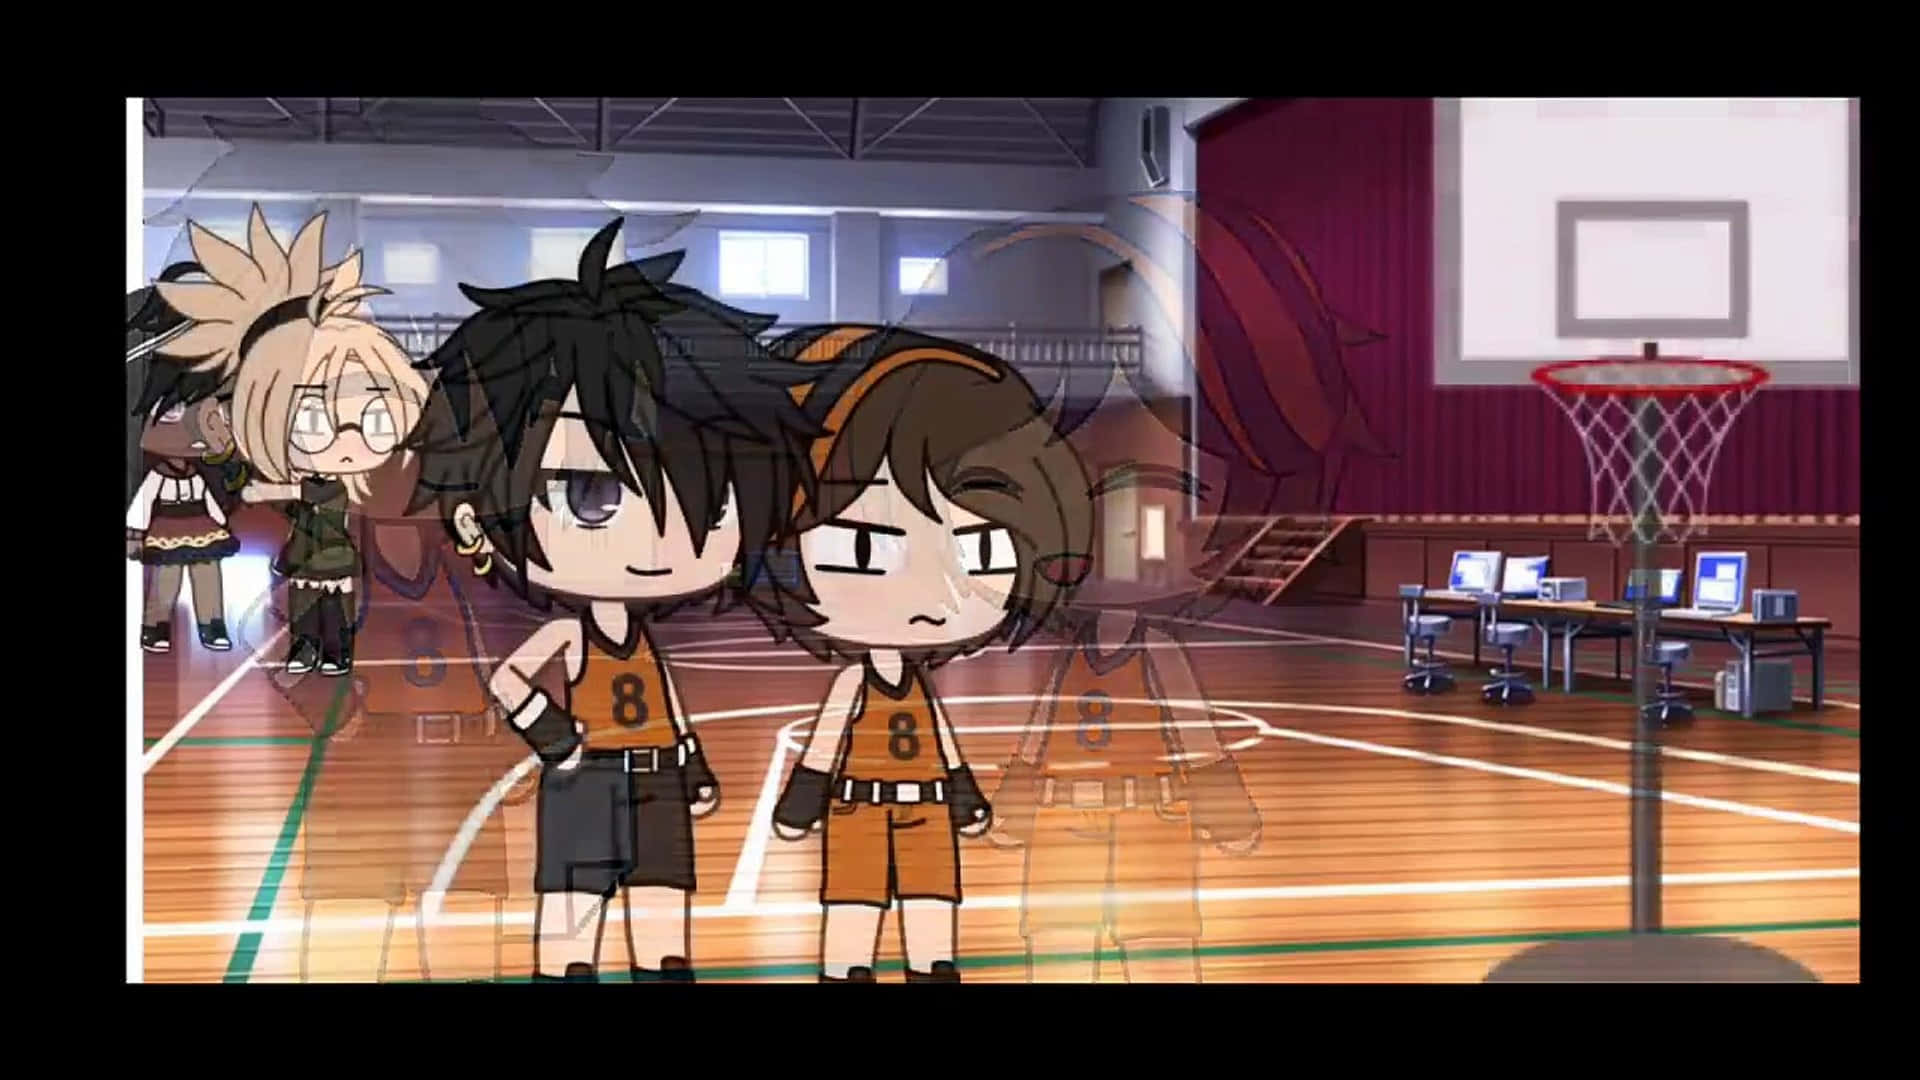 A Group Of Anime Characters Standing In A Basketball Court